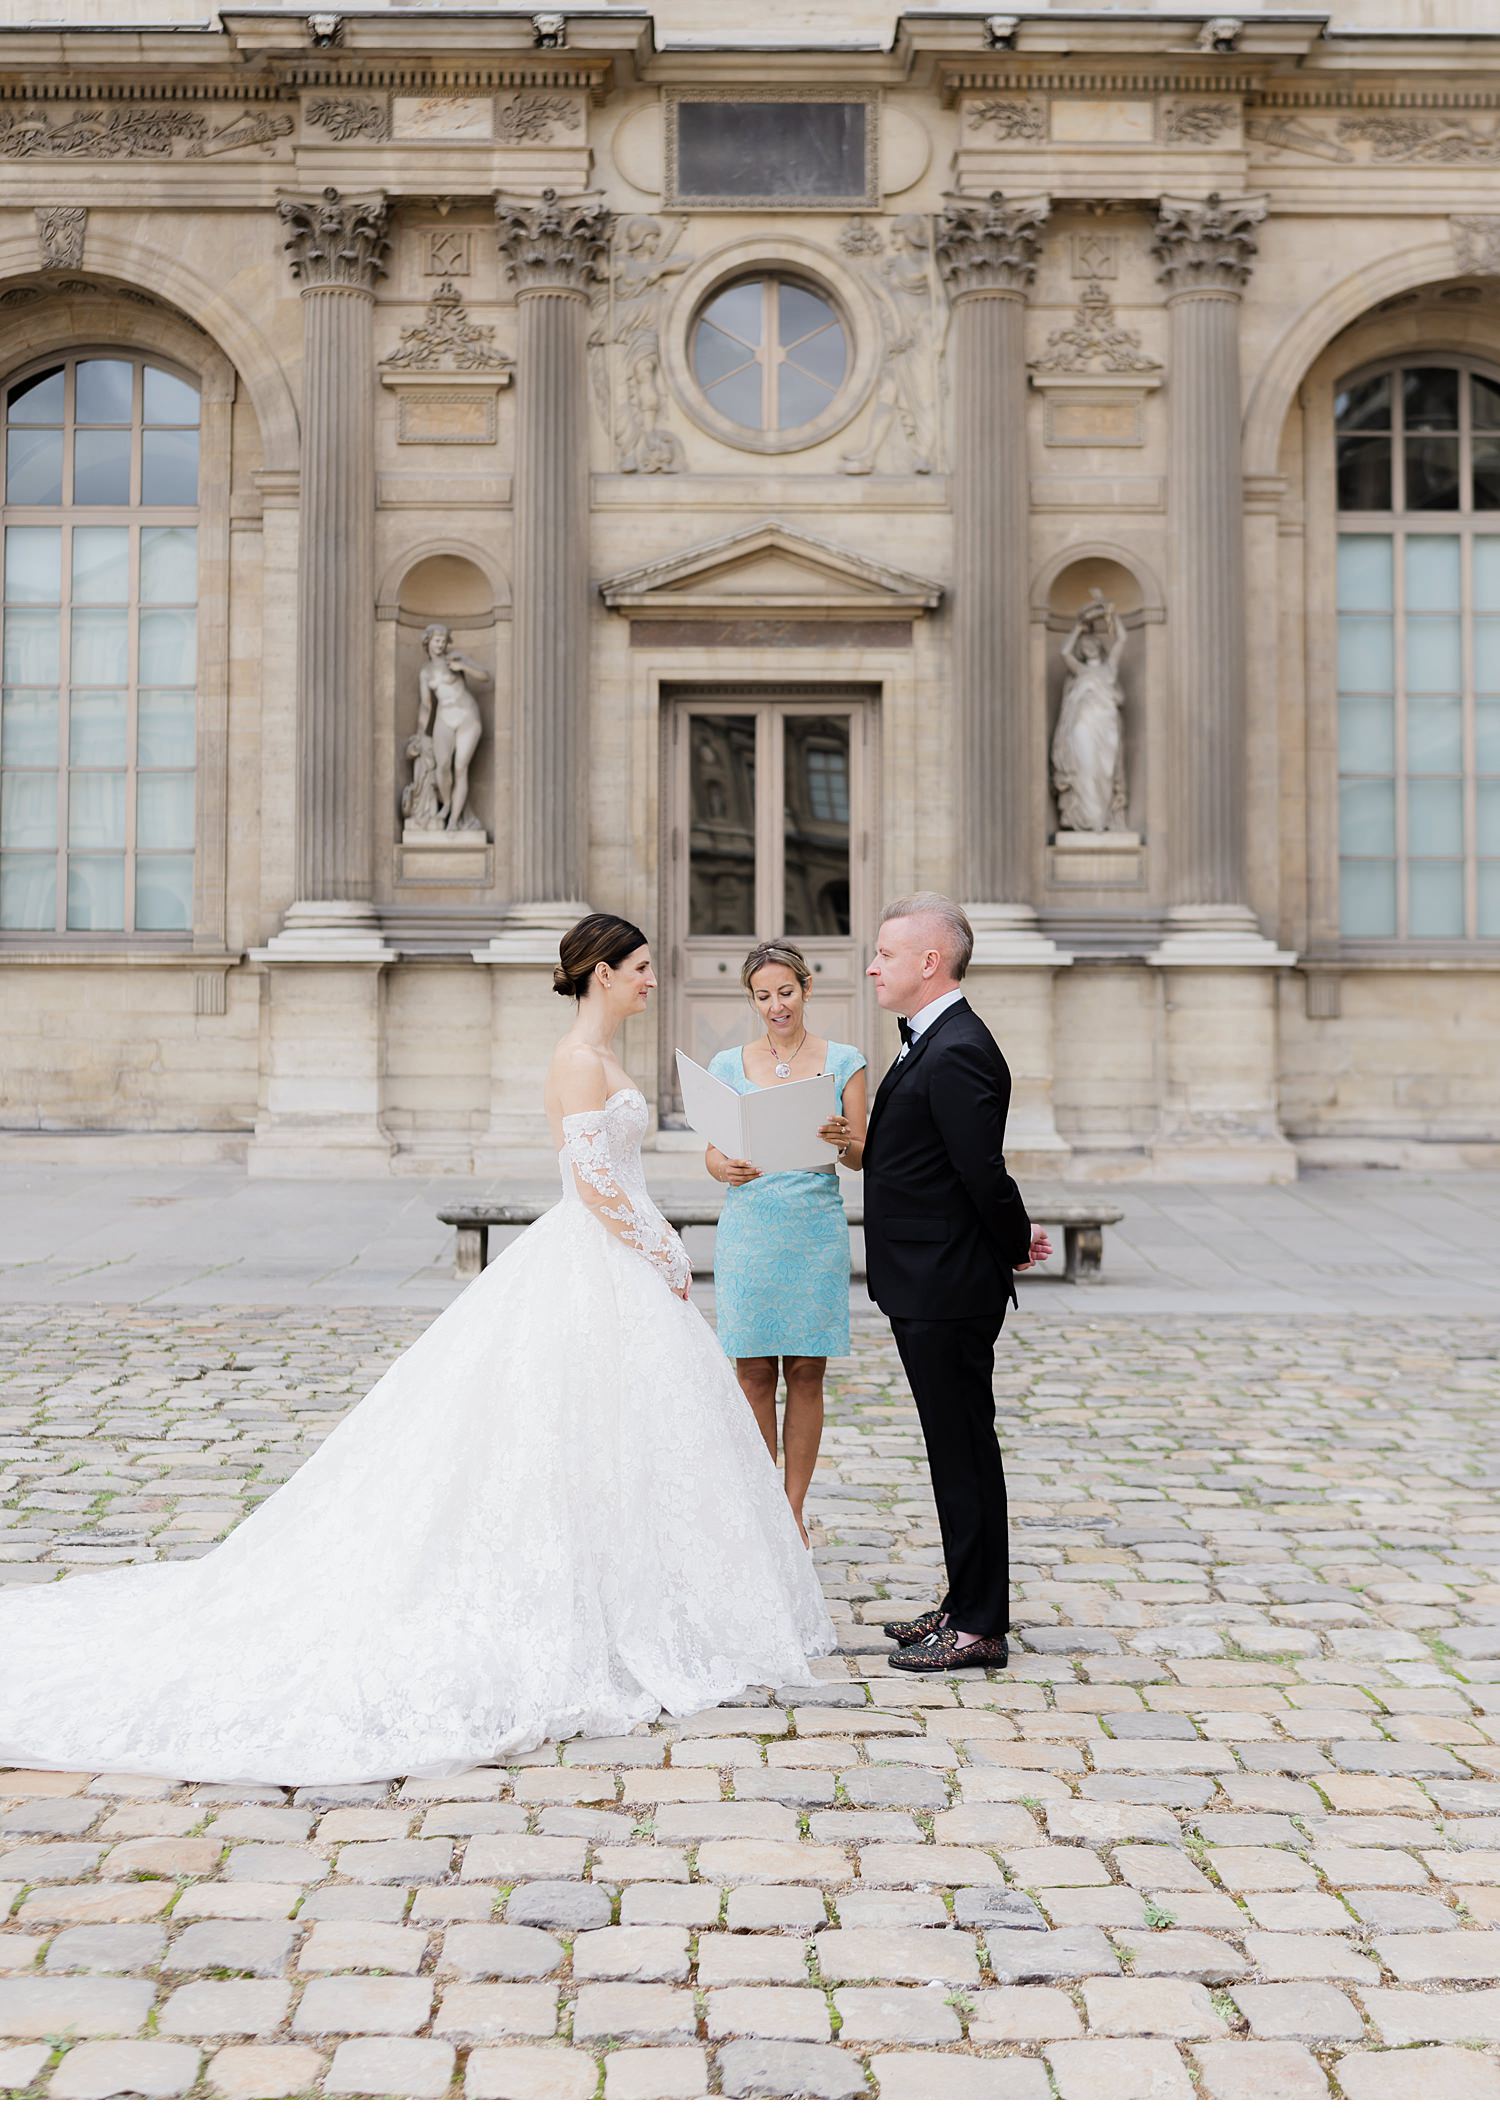 Elopement ceremony in Paris, Ceremony at the Louvre, Get married in Paris, Elope to Paris